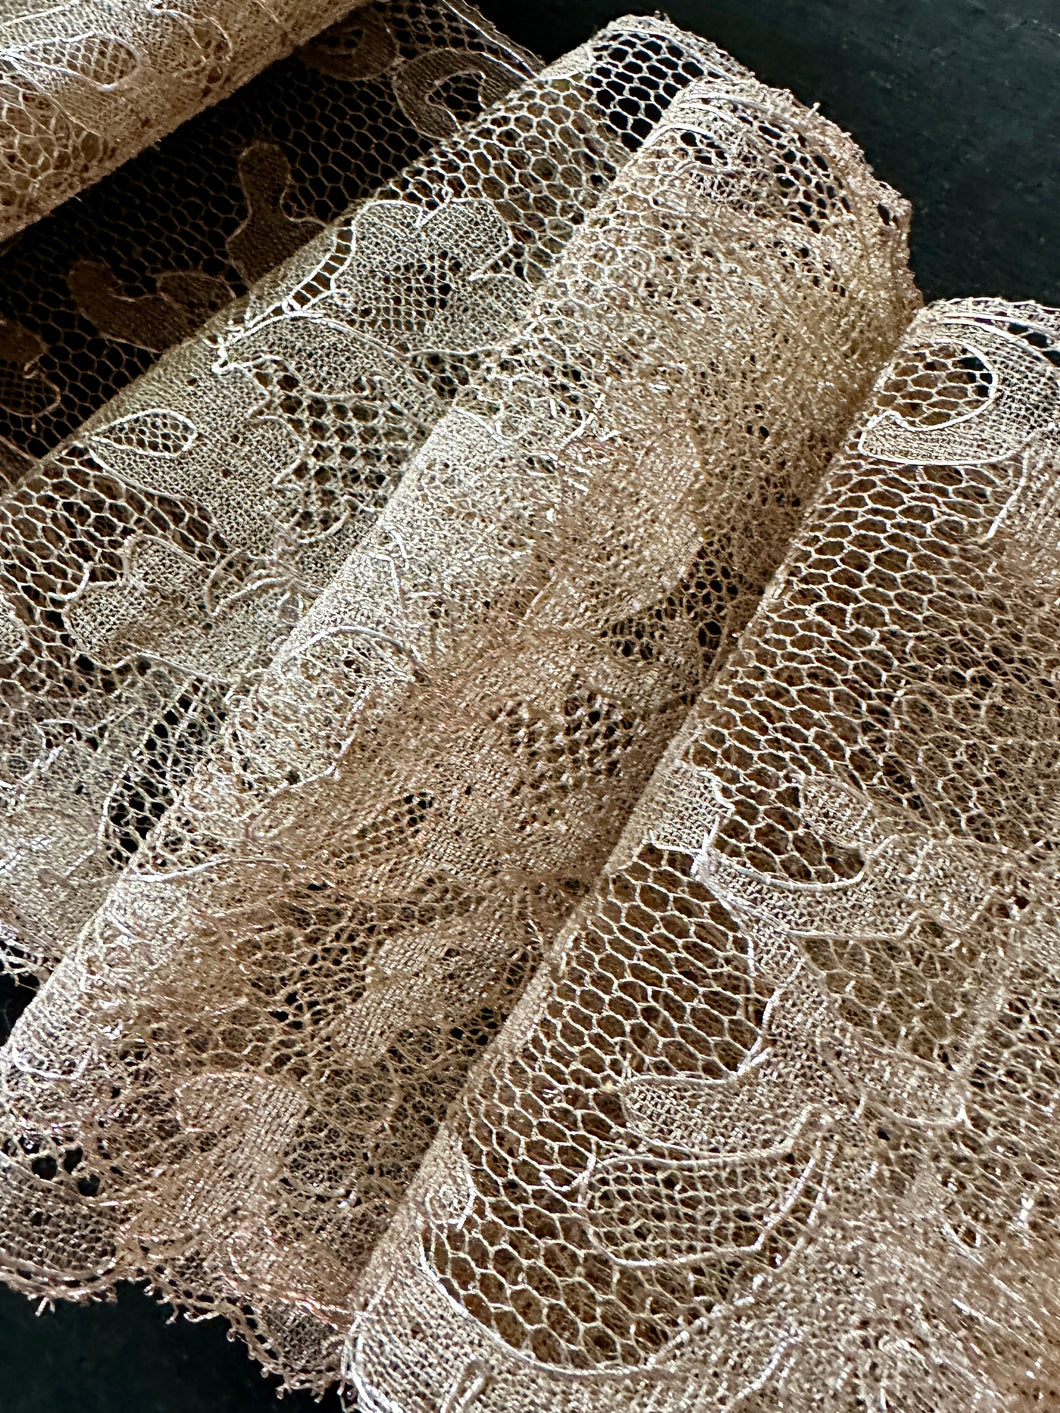 Antique French Gold Metal Lace